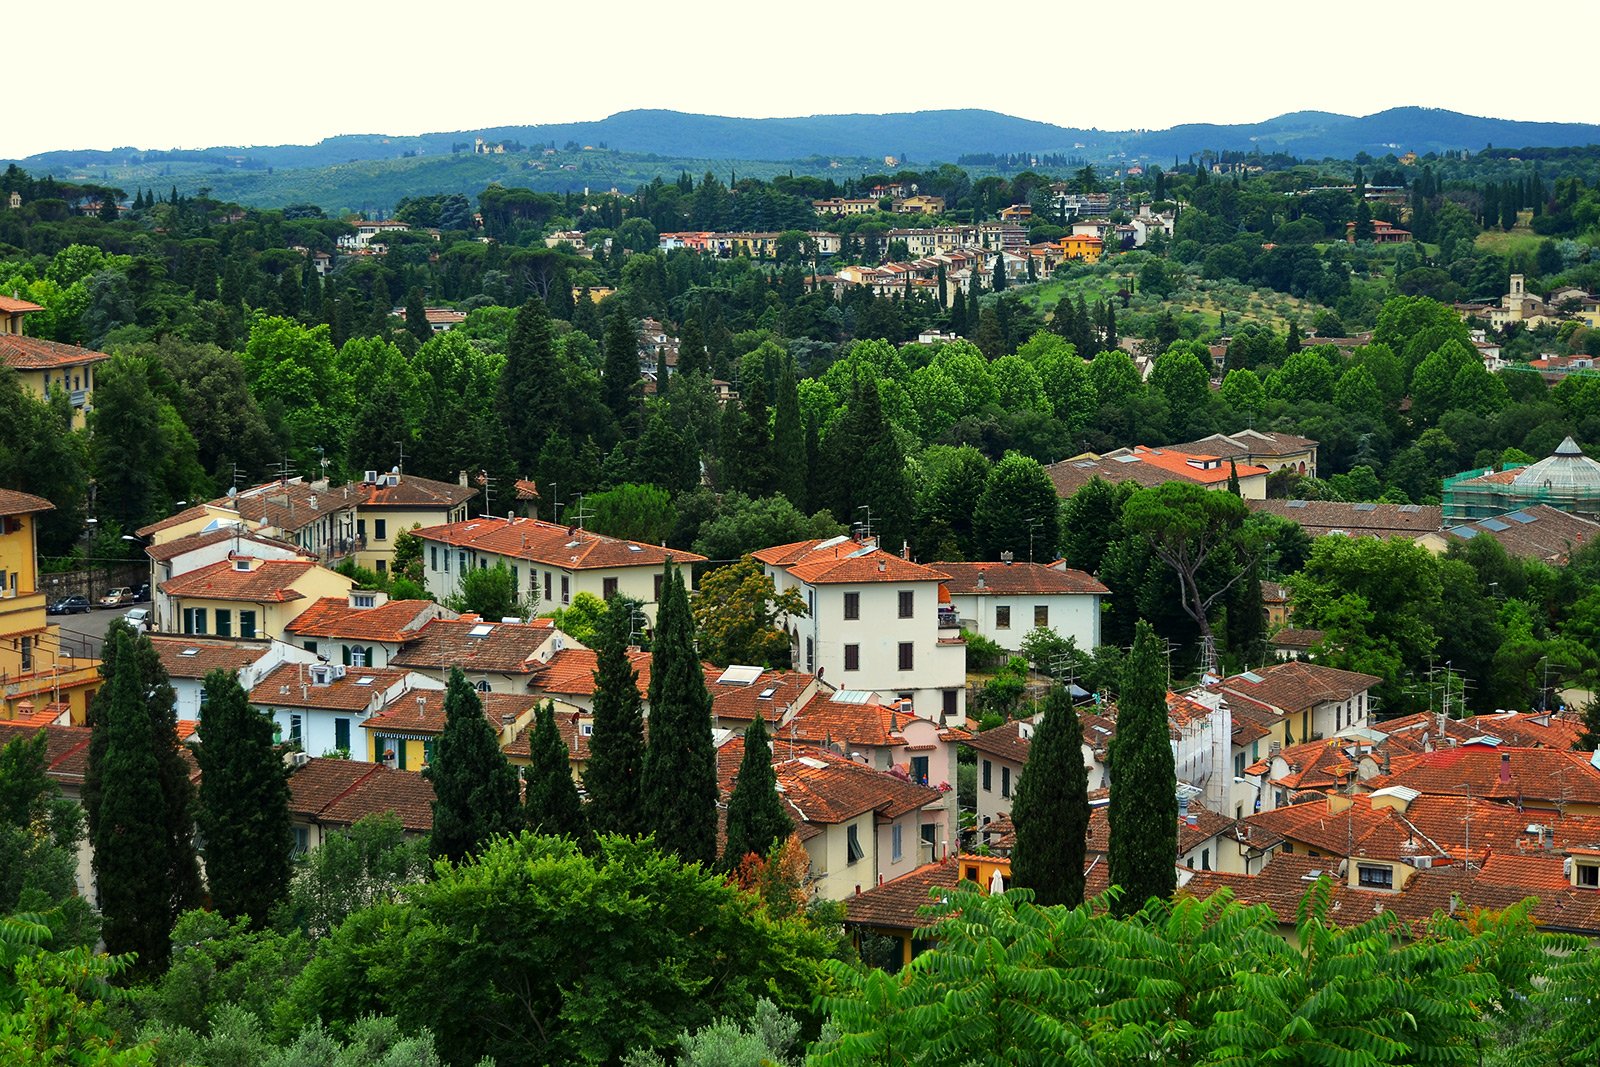 How to see the panorama of the city from the Boboli Gardens in Florence